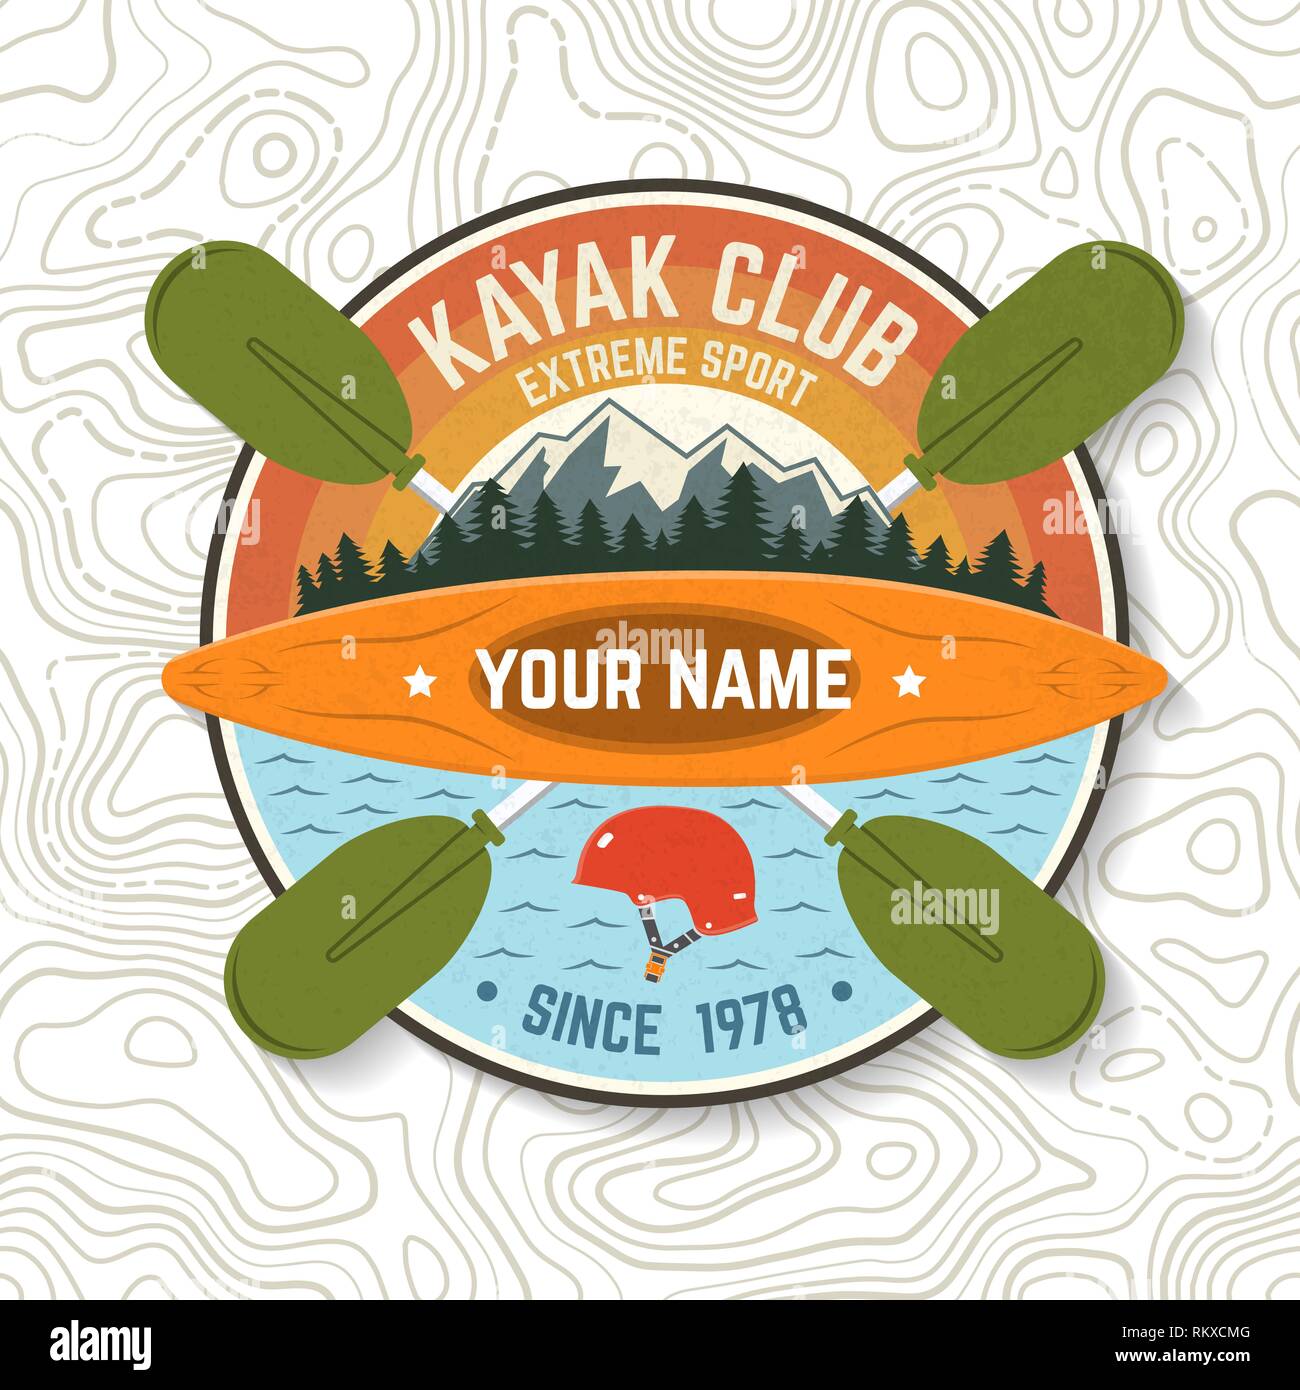 Kayak Club. Vector illustration. Concept for patch, shirt, print, stamp or tee. Vintage typography design with mountain, helmet and boat silhouette. Extreme water sport kayak patches Stock Vector